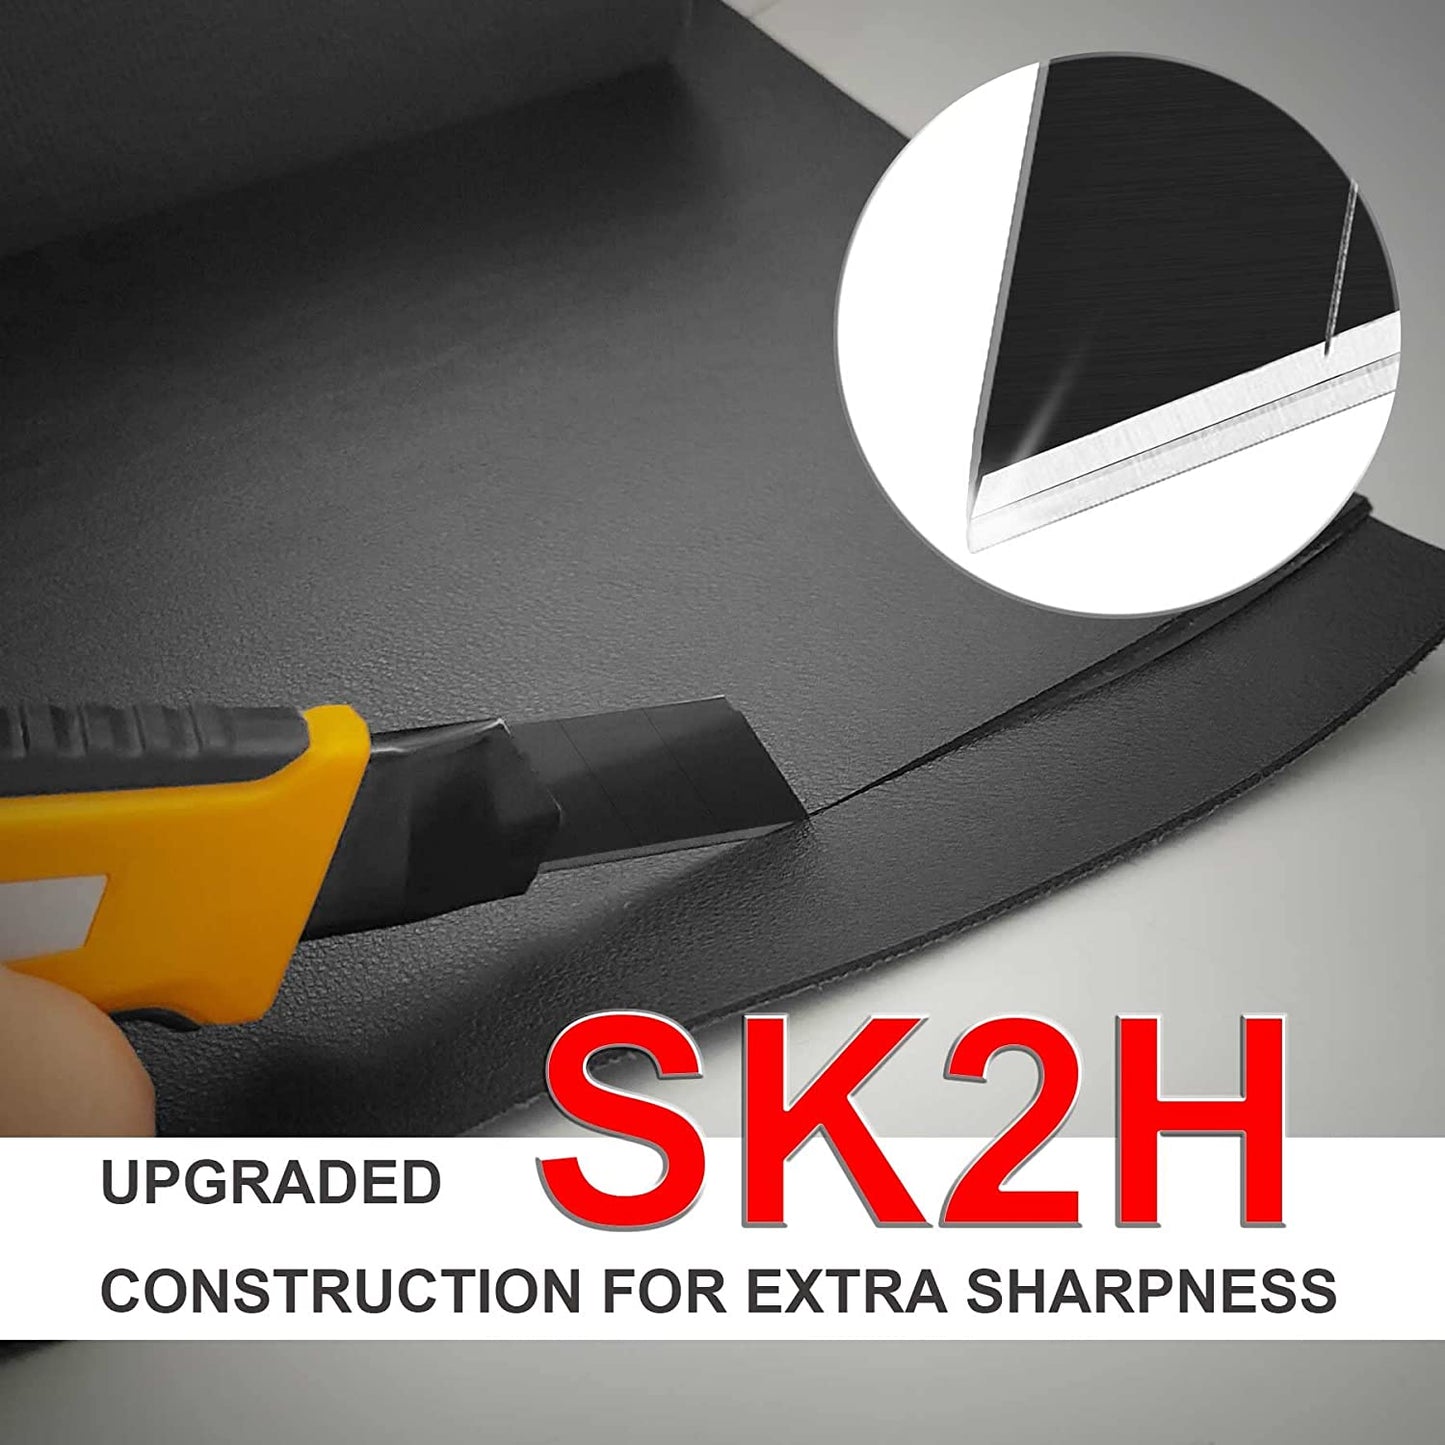 HAUTMEC 100PCS 18mm SK2H Ultra Sharp Snap Off Blades, Retractable Black Utility Knife Replacement Blades, Sharper SK2H Heavy Duty Blades, Creative Safety Box, for Box, Carpet, Rope HT0144-100PC